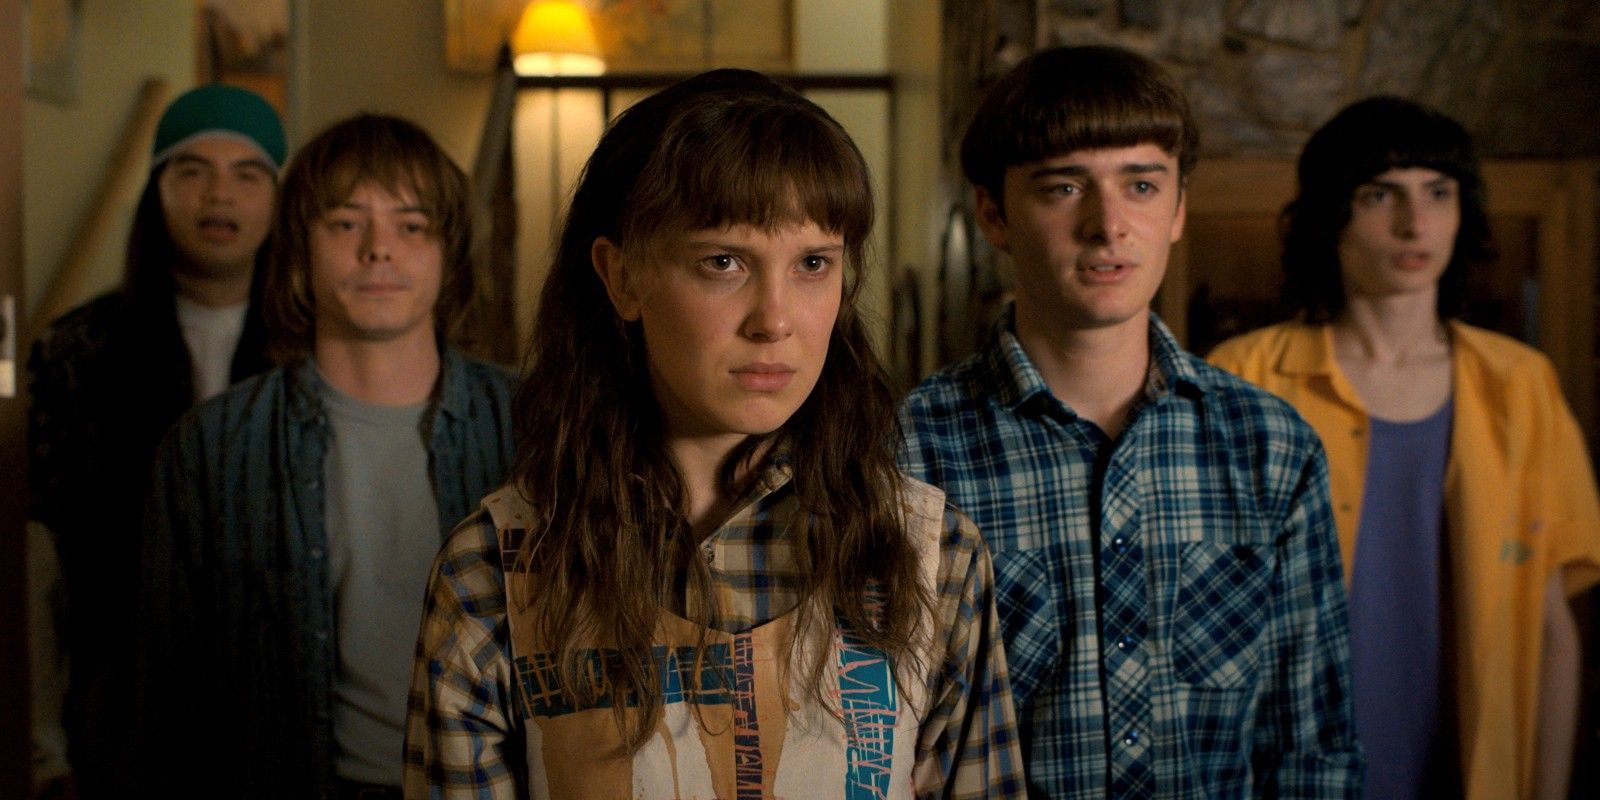 Argyle, Jonathan, El, Will, and Mike in Season 4 of Stranger Things